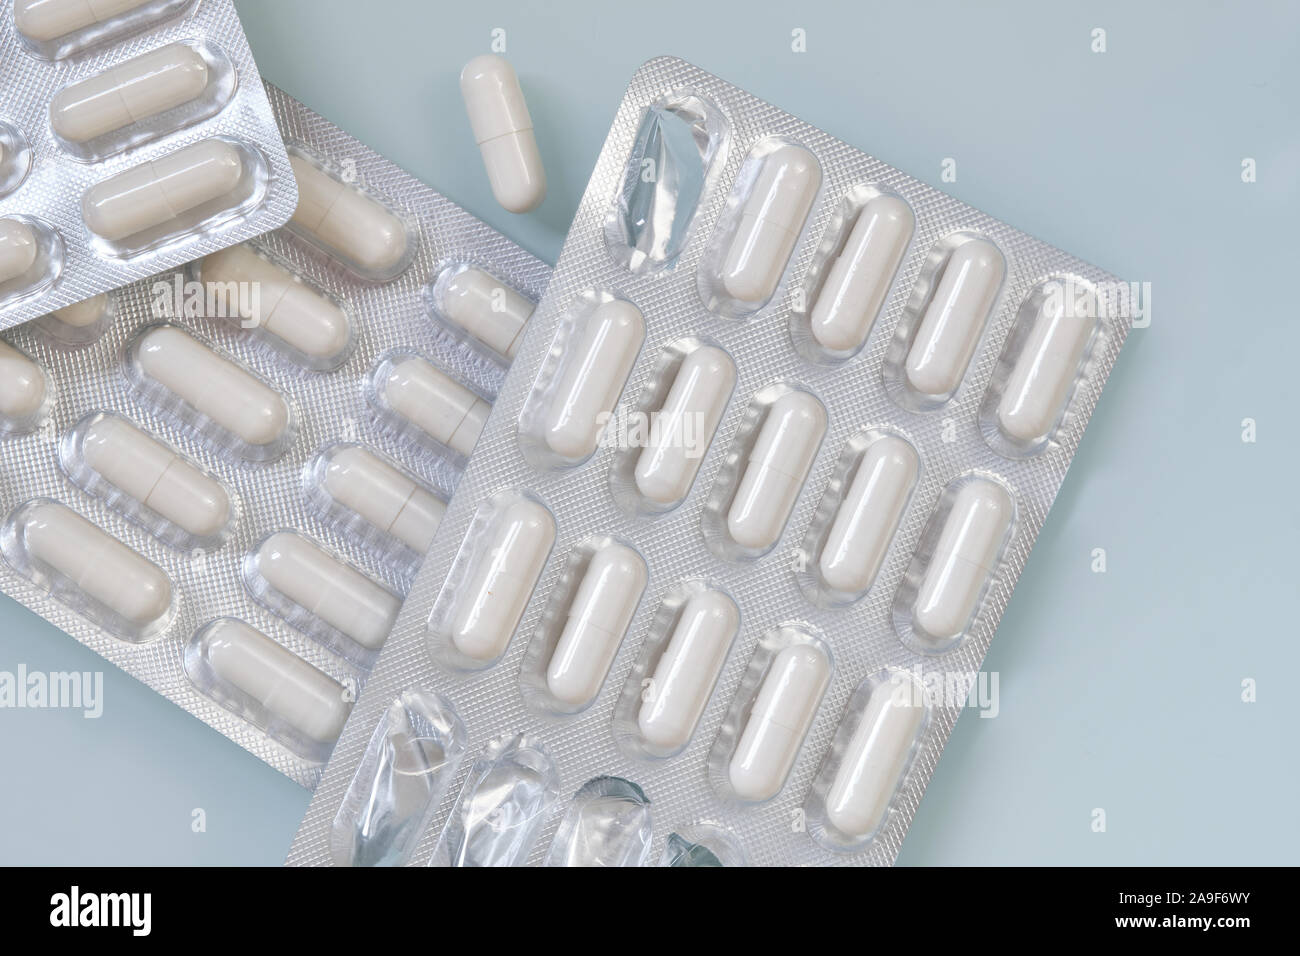 White capsules in silver packaging filled with the nutritional supplements of zinc and selenium are lying unopened on a white background. Stock Photo